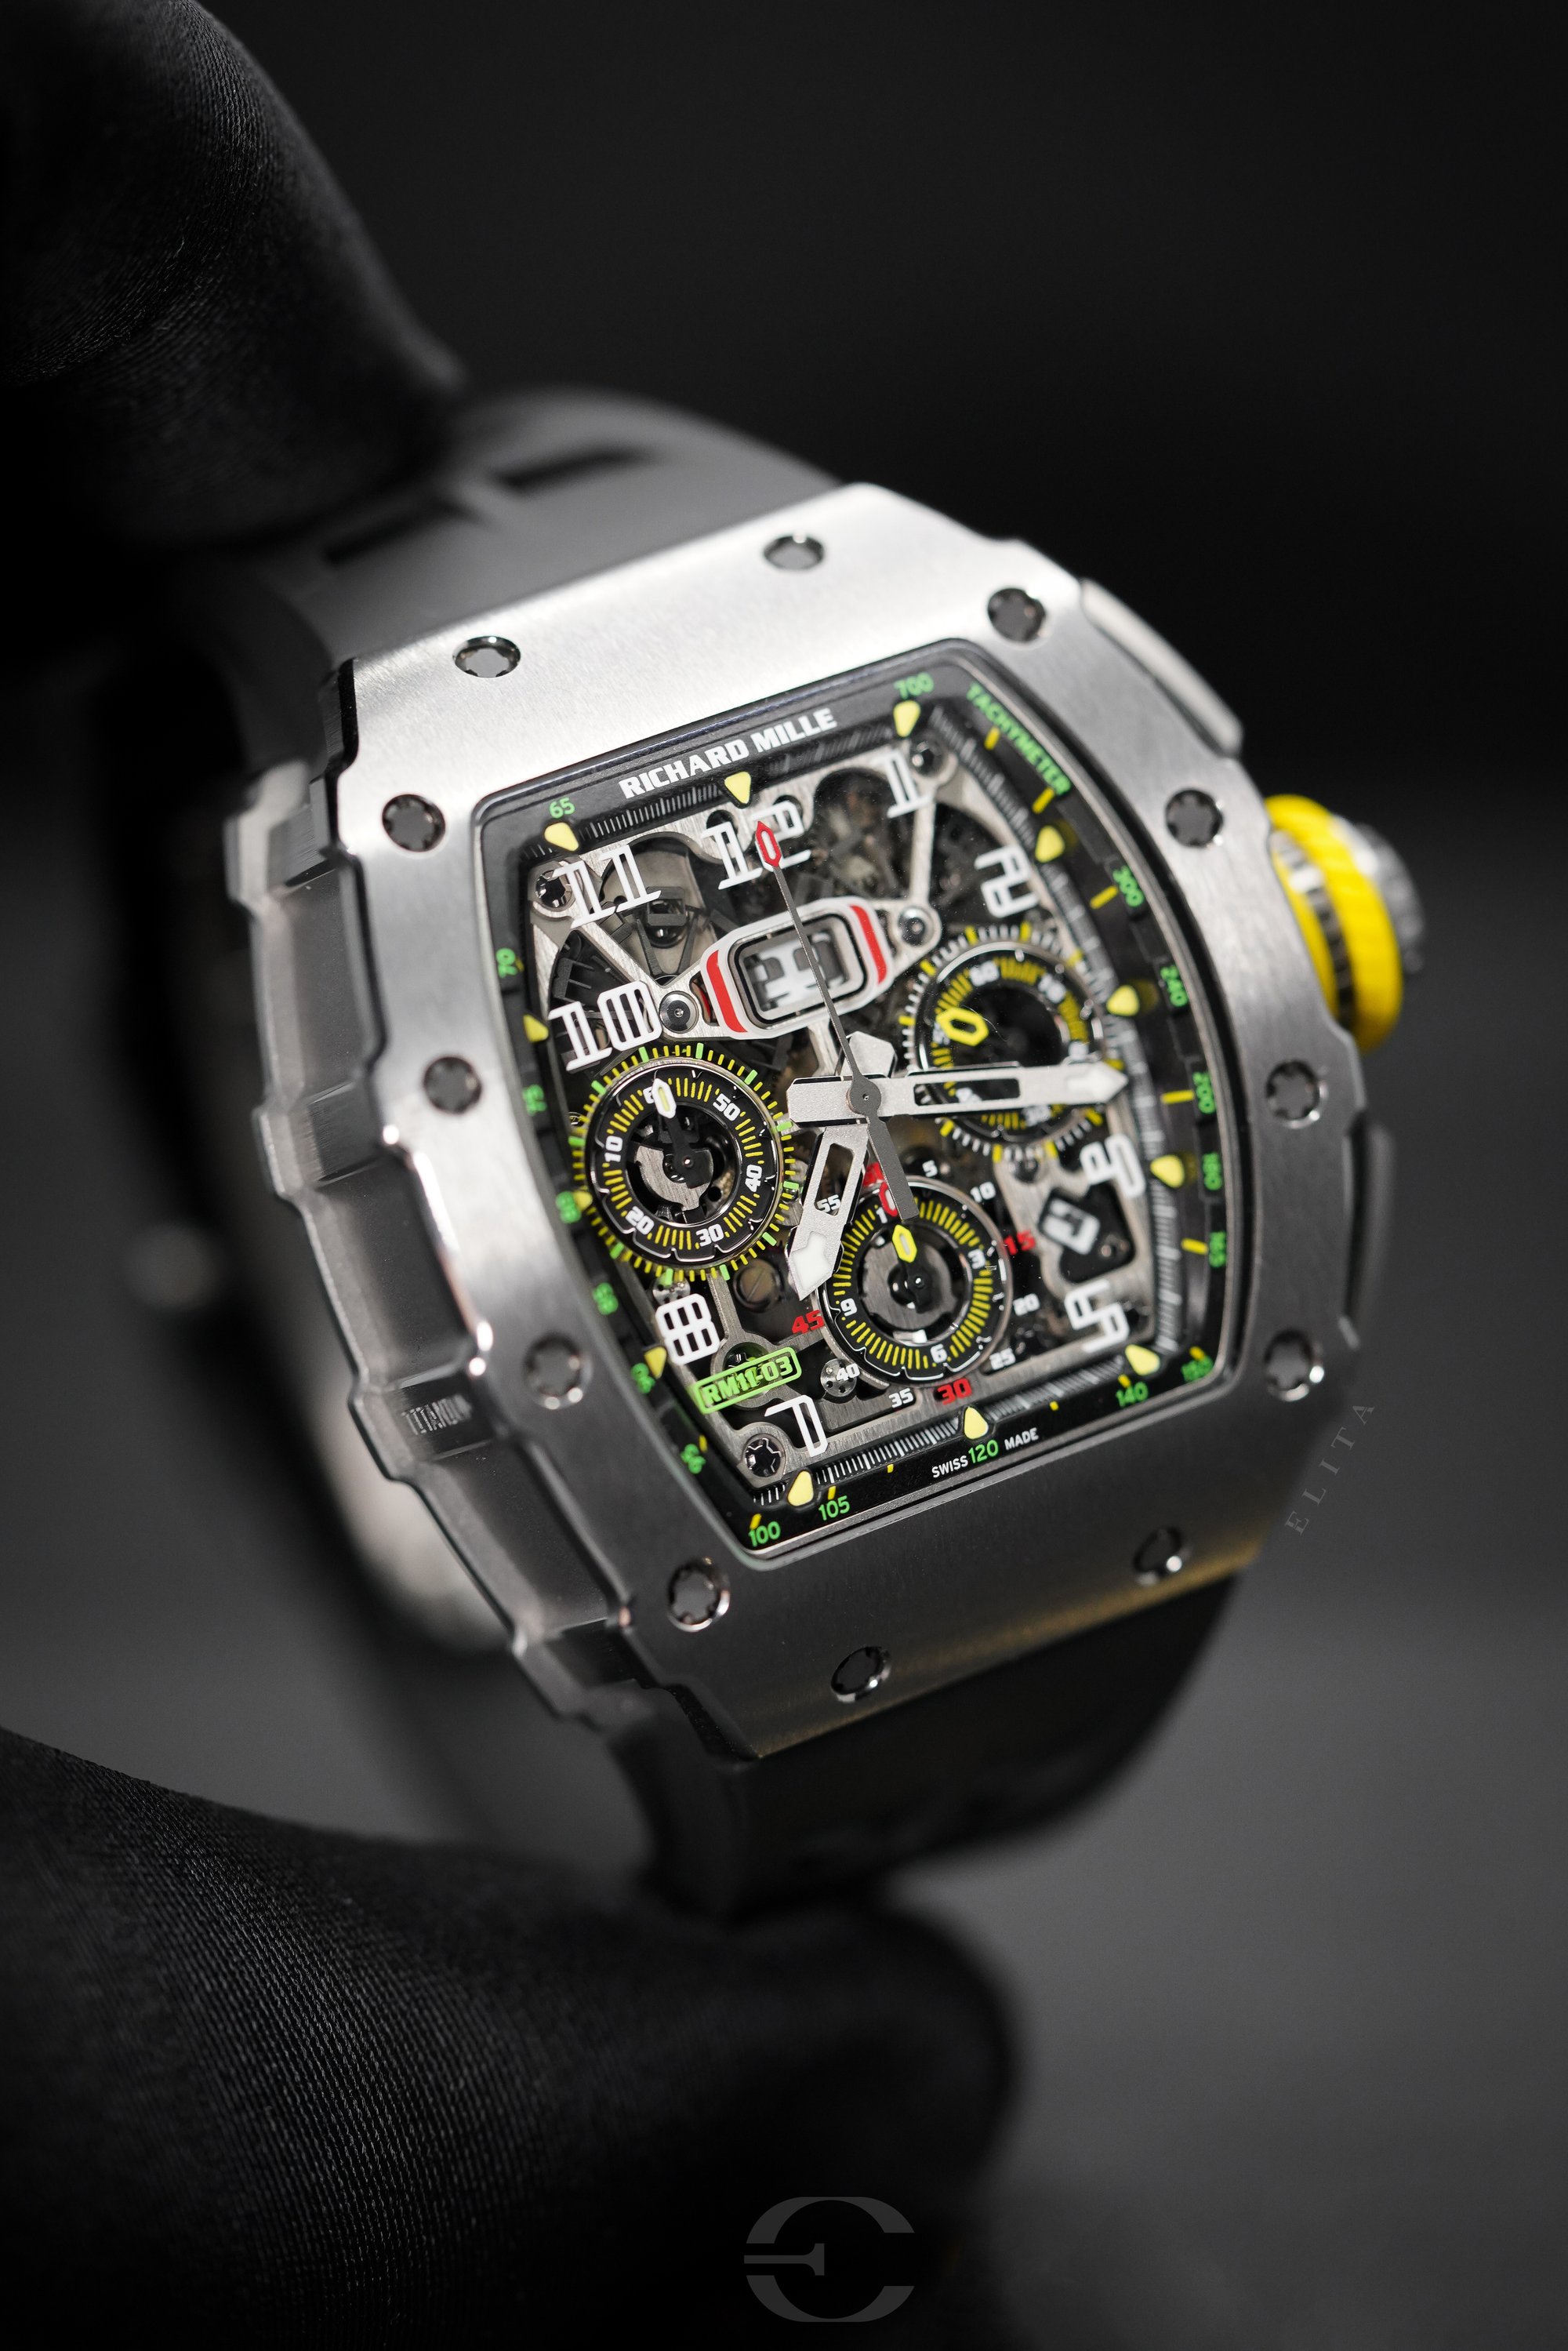 Richard Mille Rm 11 03 Titanium Automatic Flyback Chronograph In